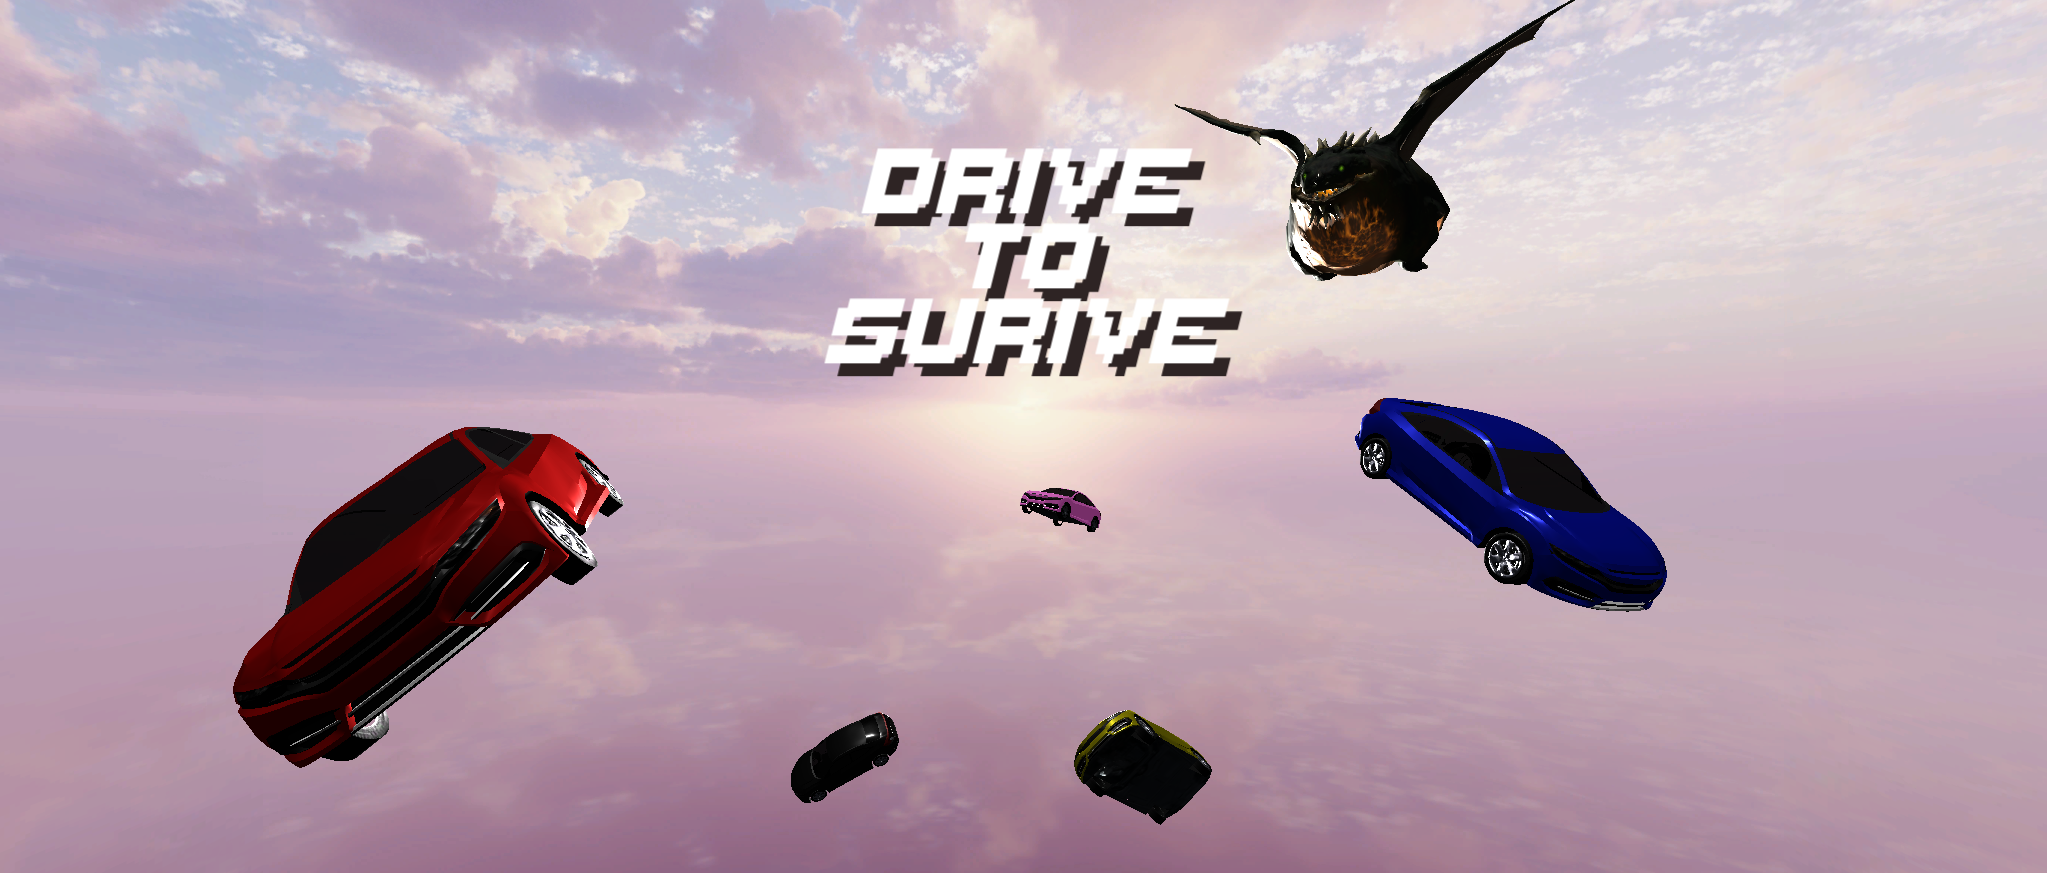 Drive to Survive!